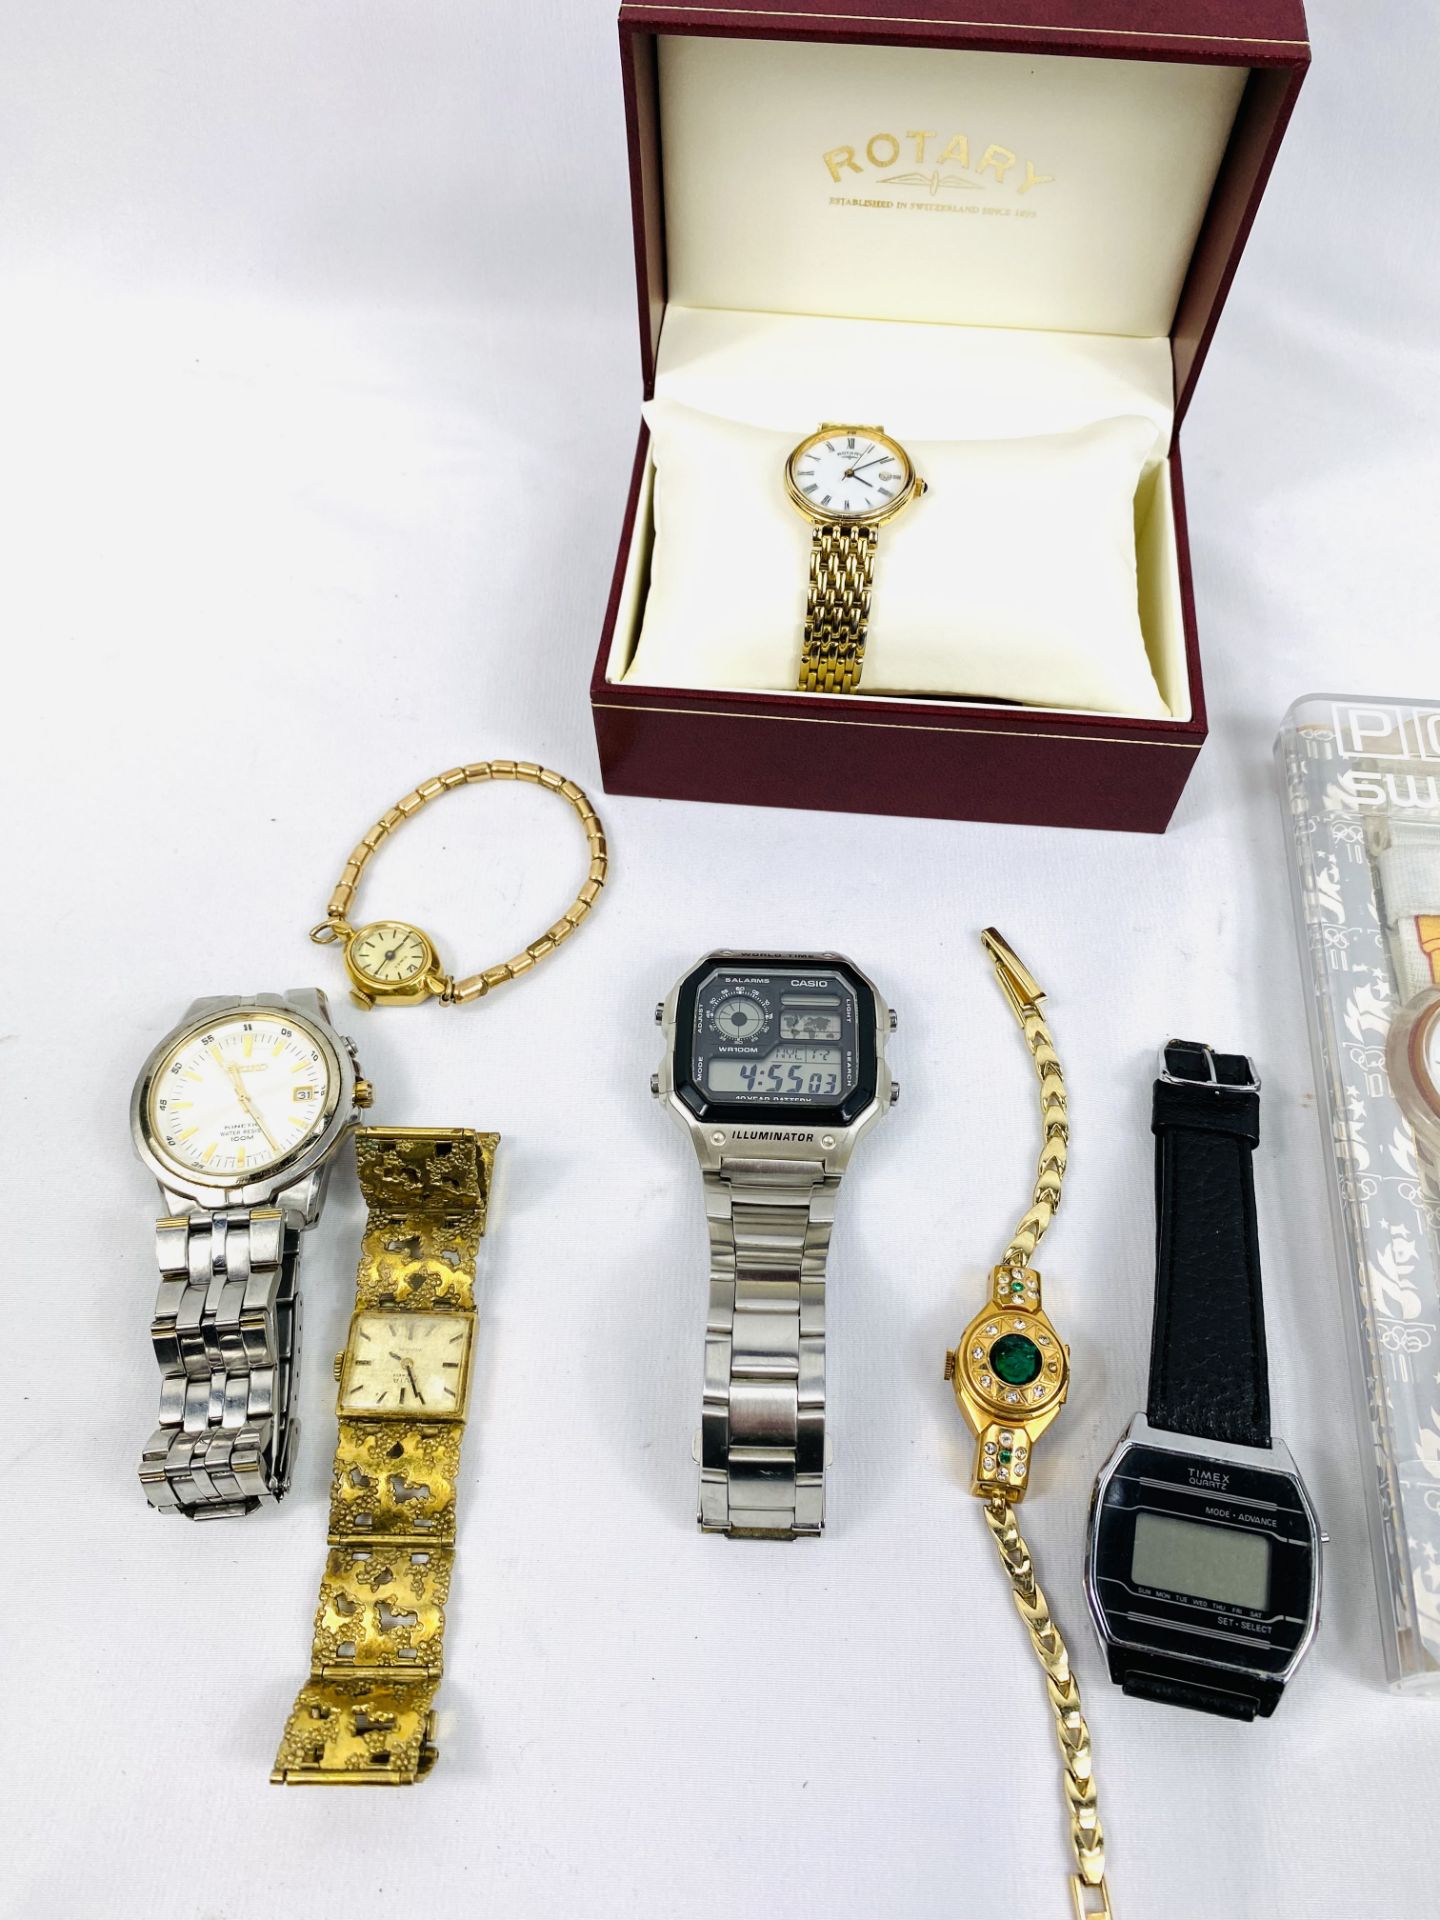 Collection of watches to include Casio, Swatch, Seiko and Rotary. - Image 3 of 3